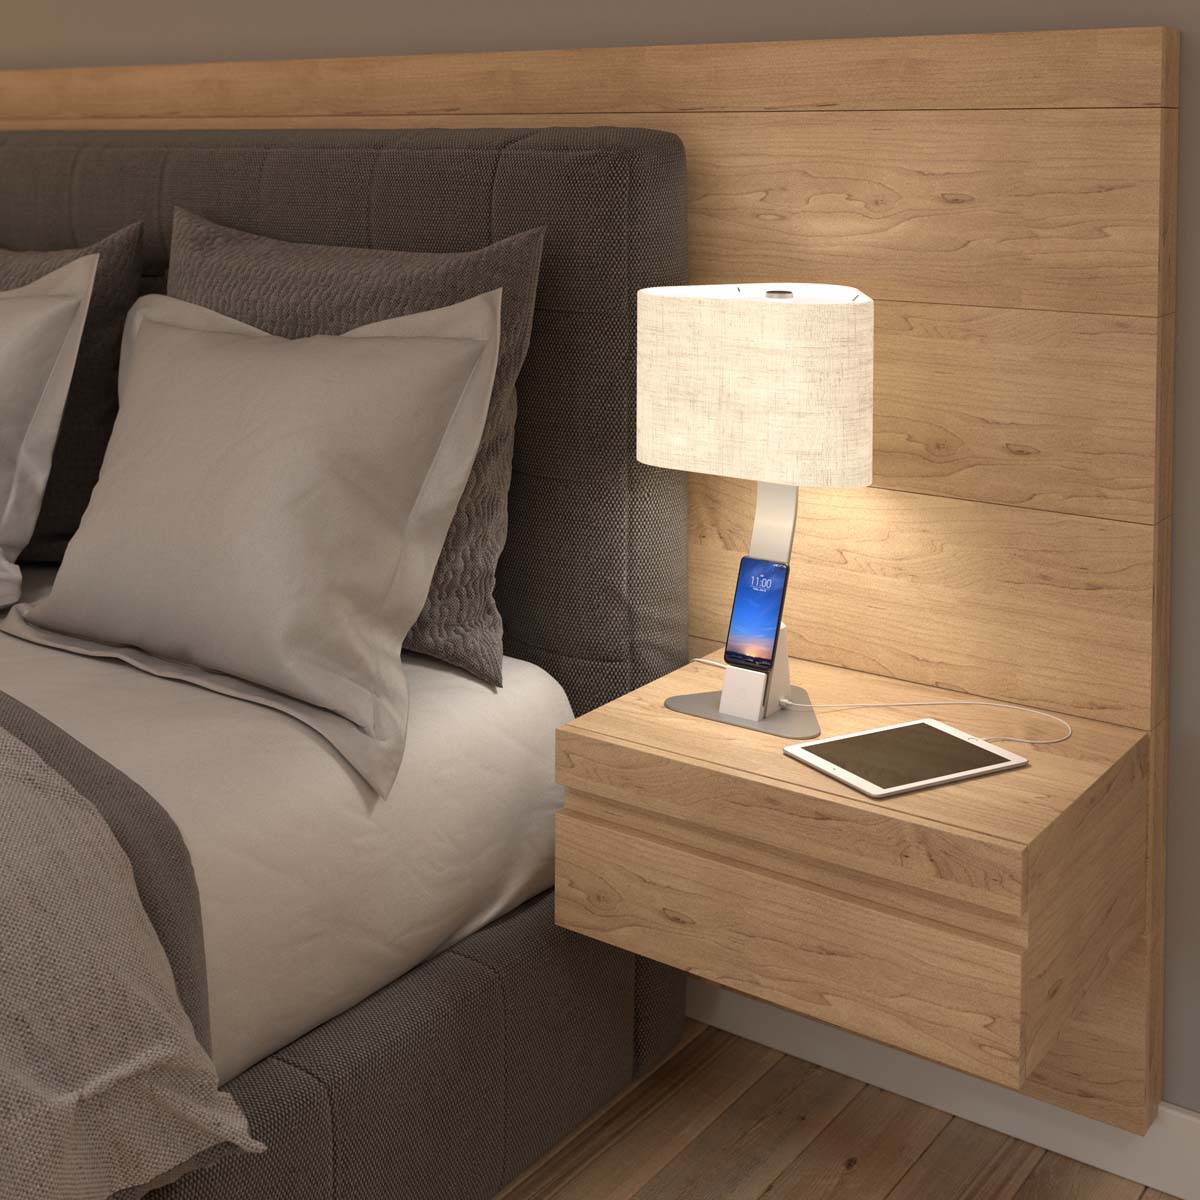 A LUX lamp charges a smartphone and a tablet on a bedside table.